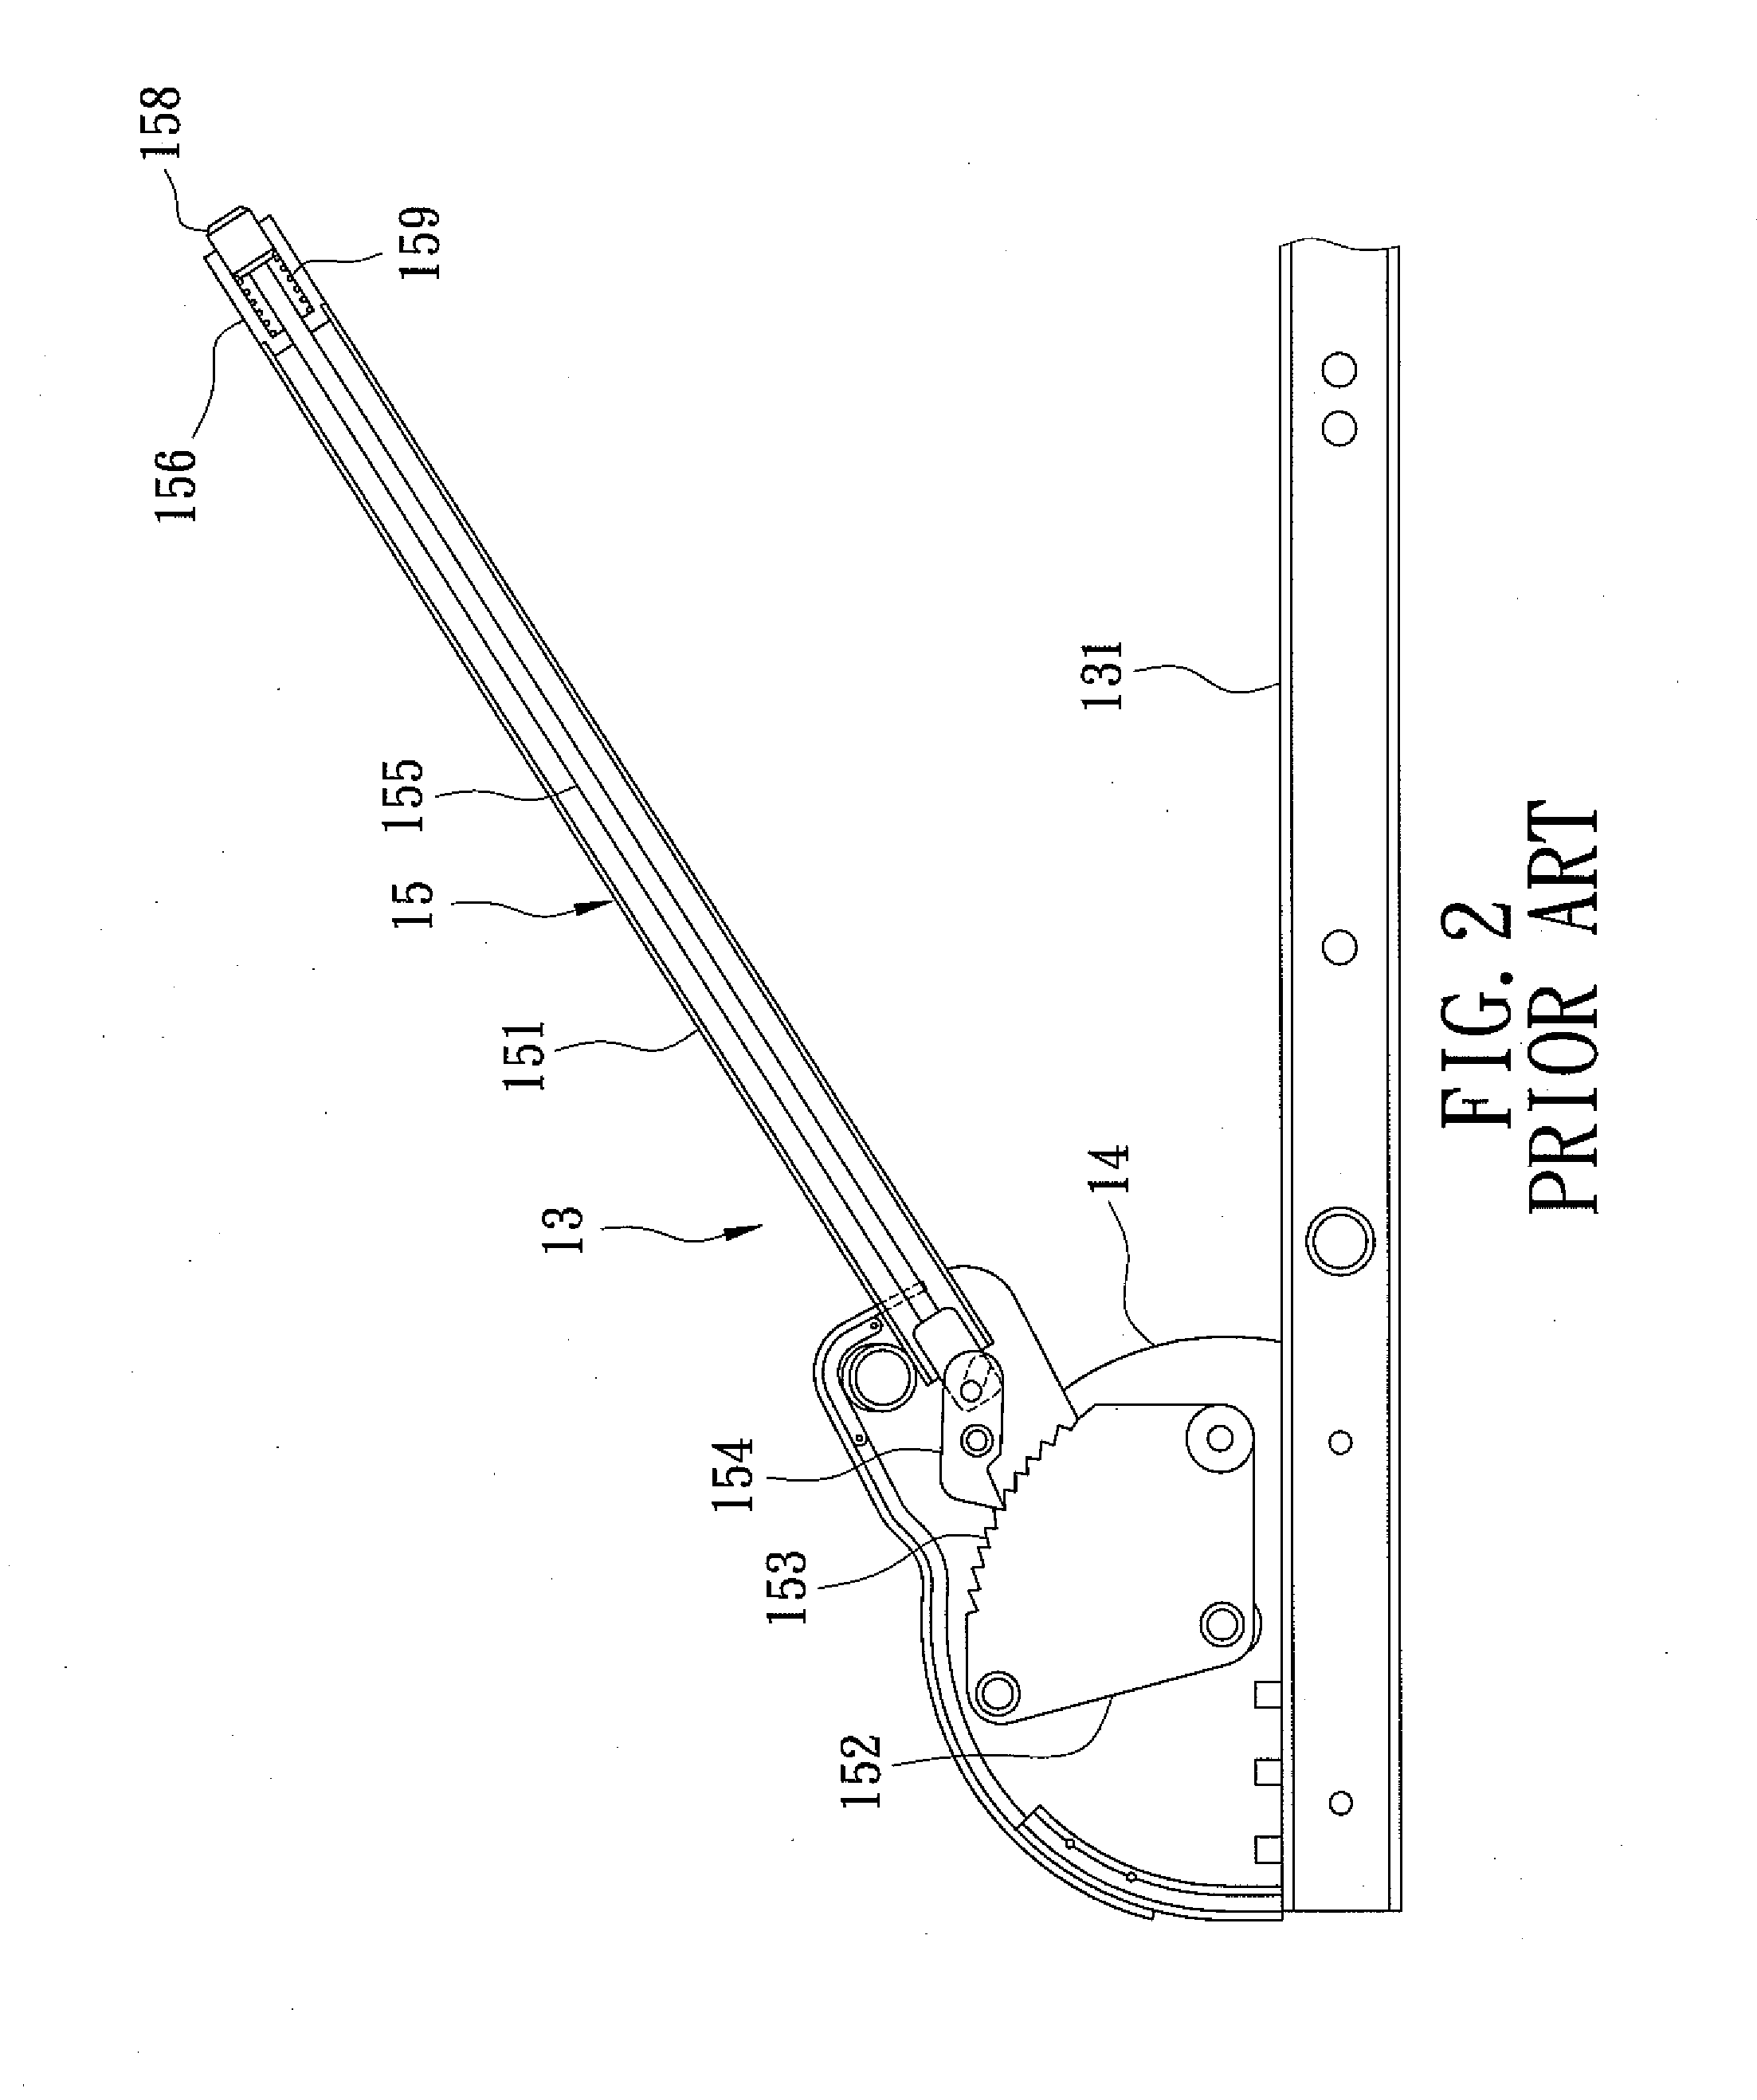 Ankle-clamping device for an inversion table